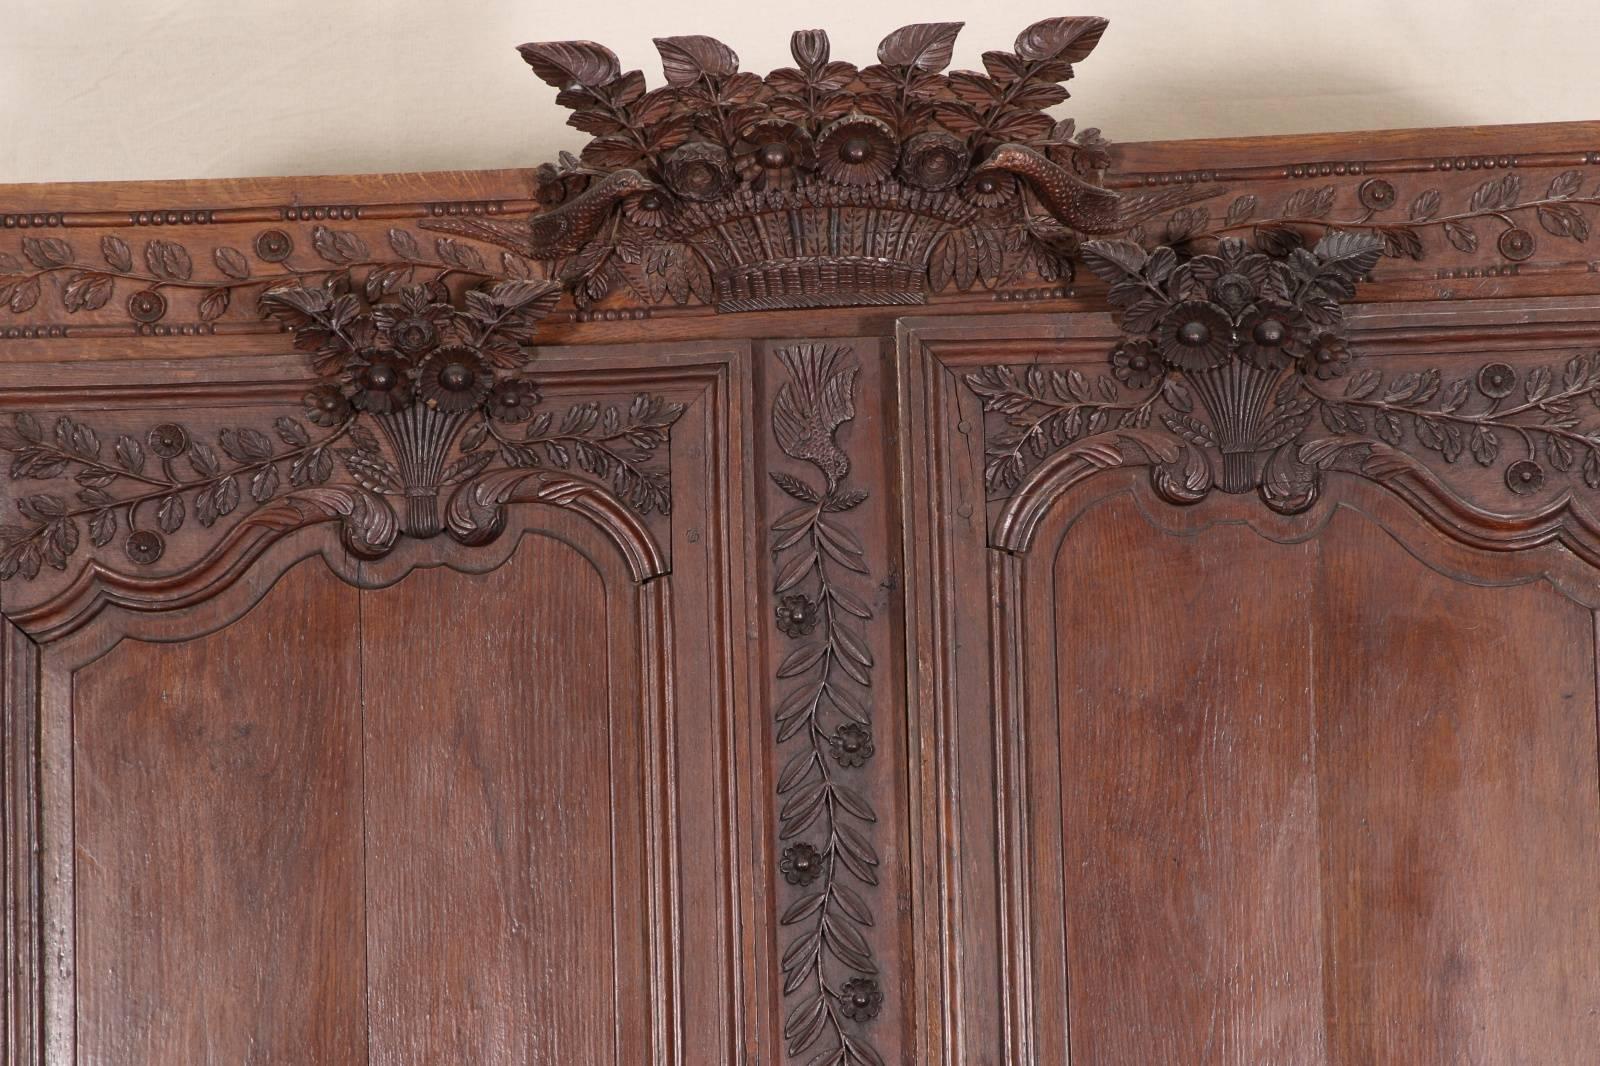 Antique carved French armoire, oak, elaborately carved projecting crest of a floral basket with birds, the doors with tall crests of bunches of flowers on the tops, and roundels of lidded urns in relief on the front. Overall carved bands of